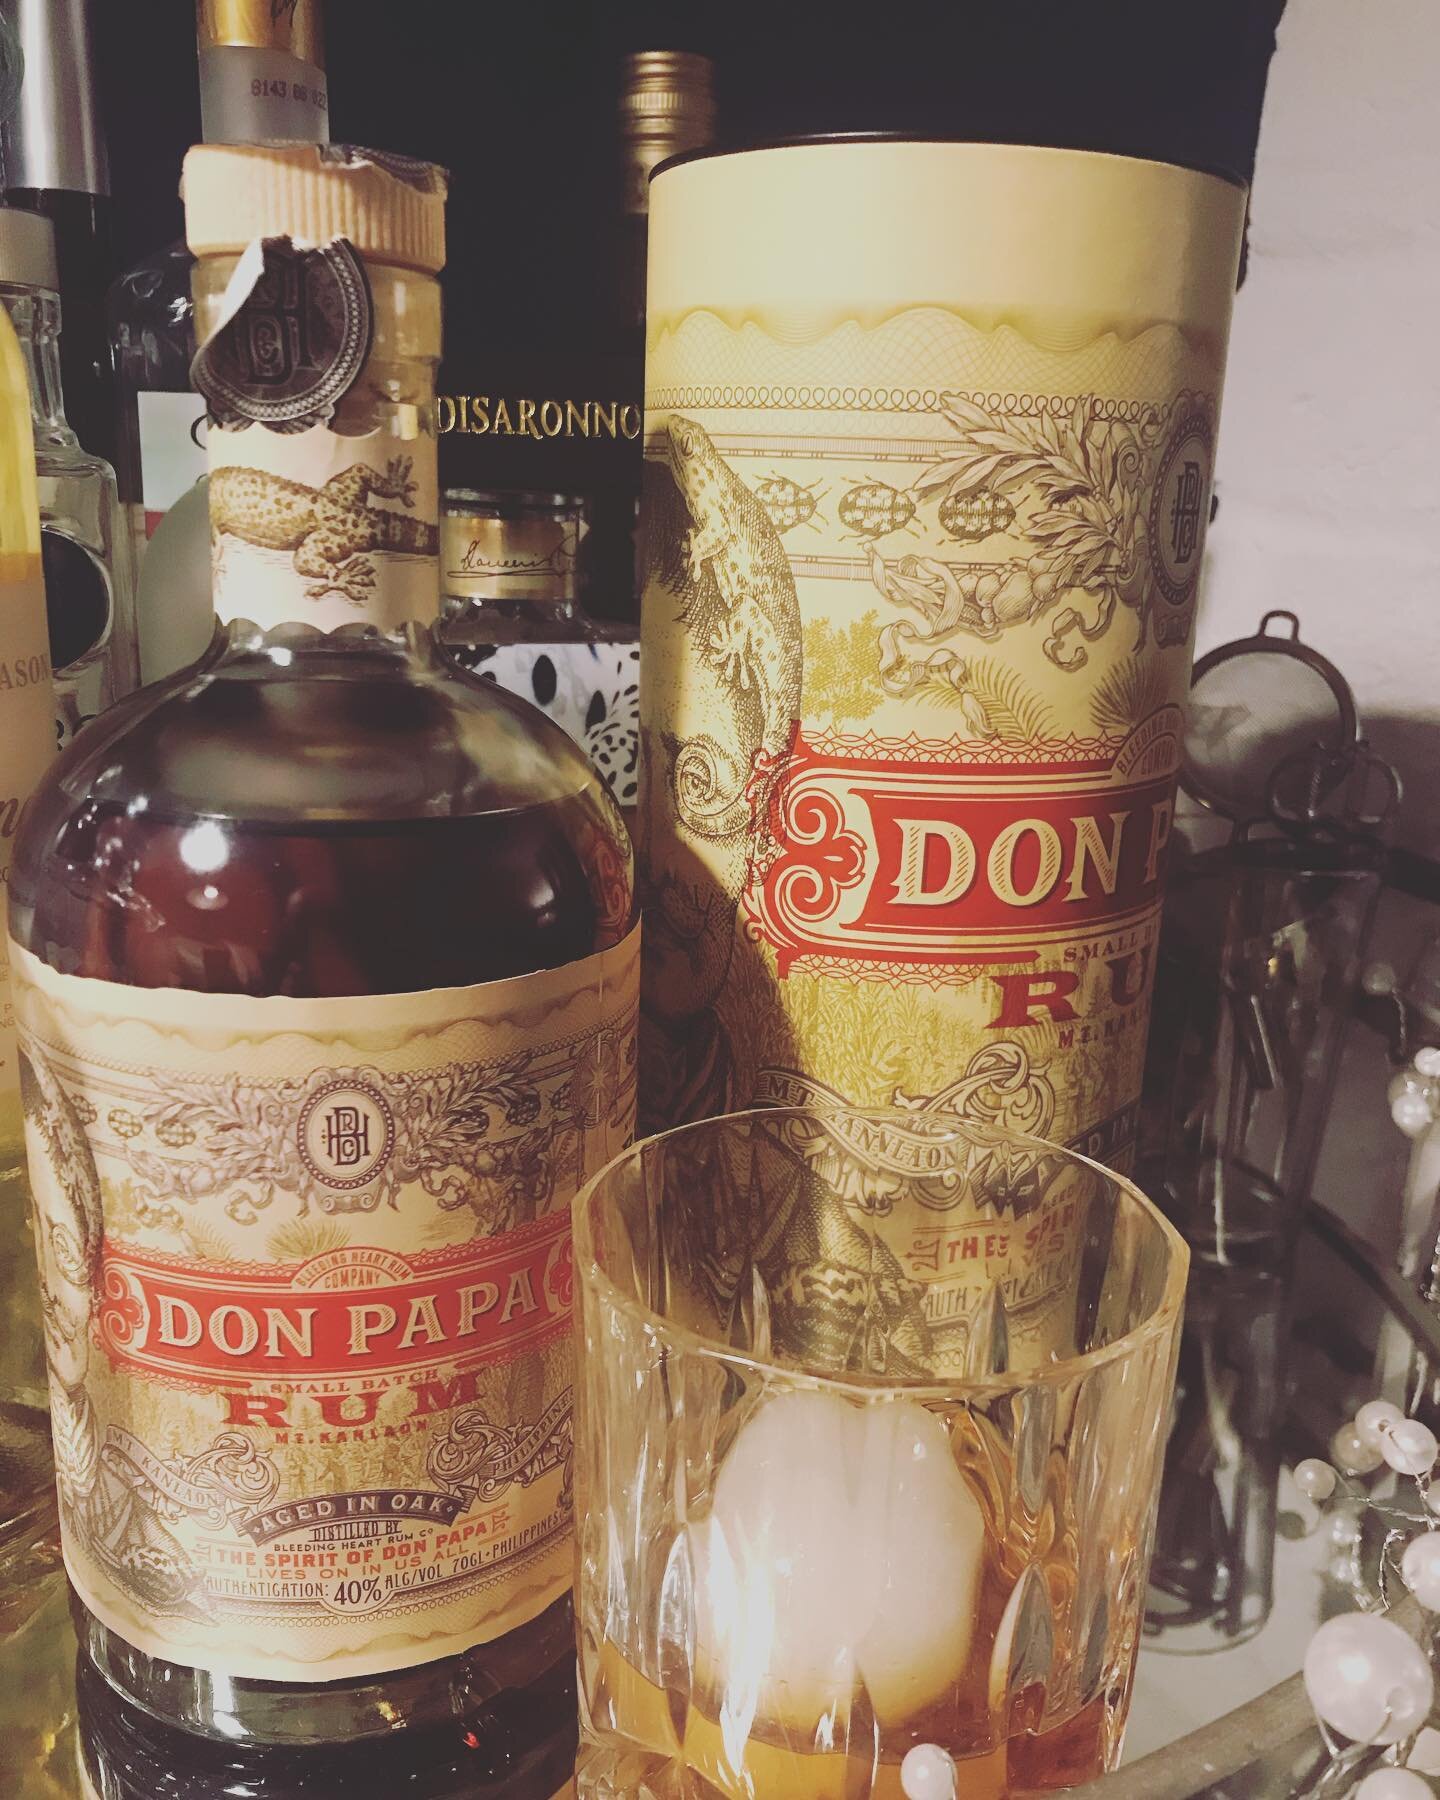 Time for a birthday drink...
Love a @donpaparum 
#donpapa #rum #lockdown #birthday #stayhome  #drink #alcohol